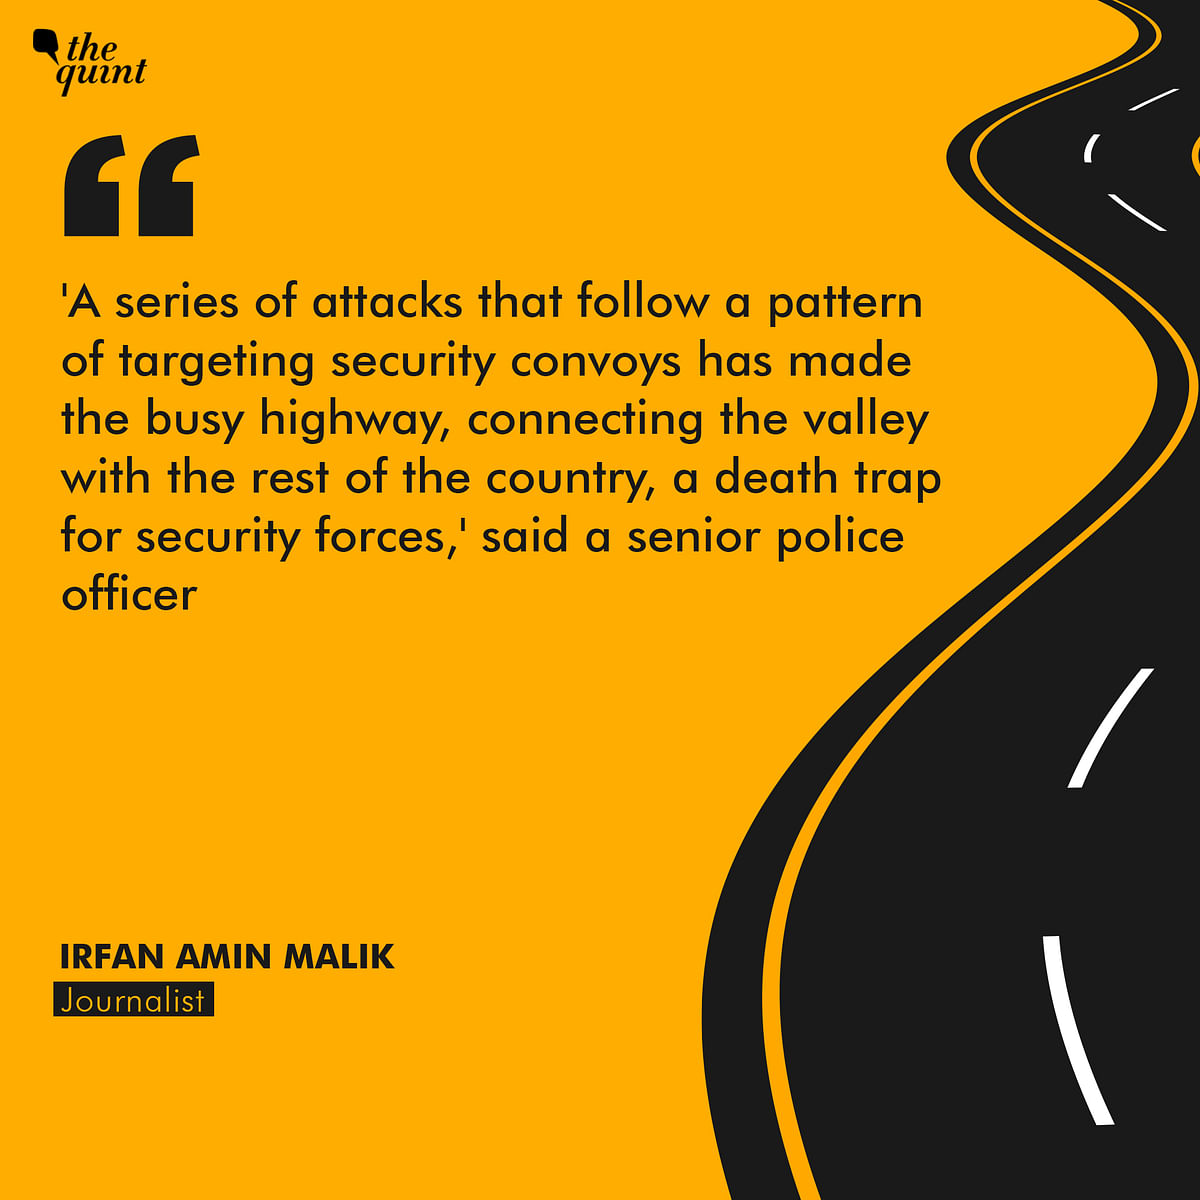 The stretch has become a ‘hunting ground’ for militants, with at least 82 security personnel’s lives being claimed.